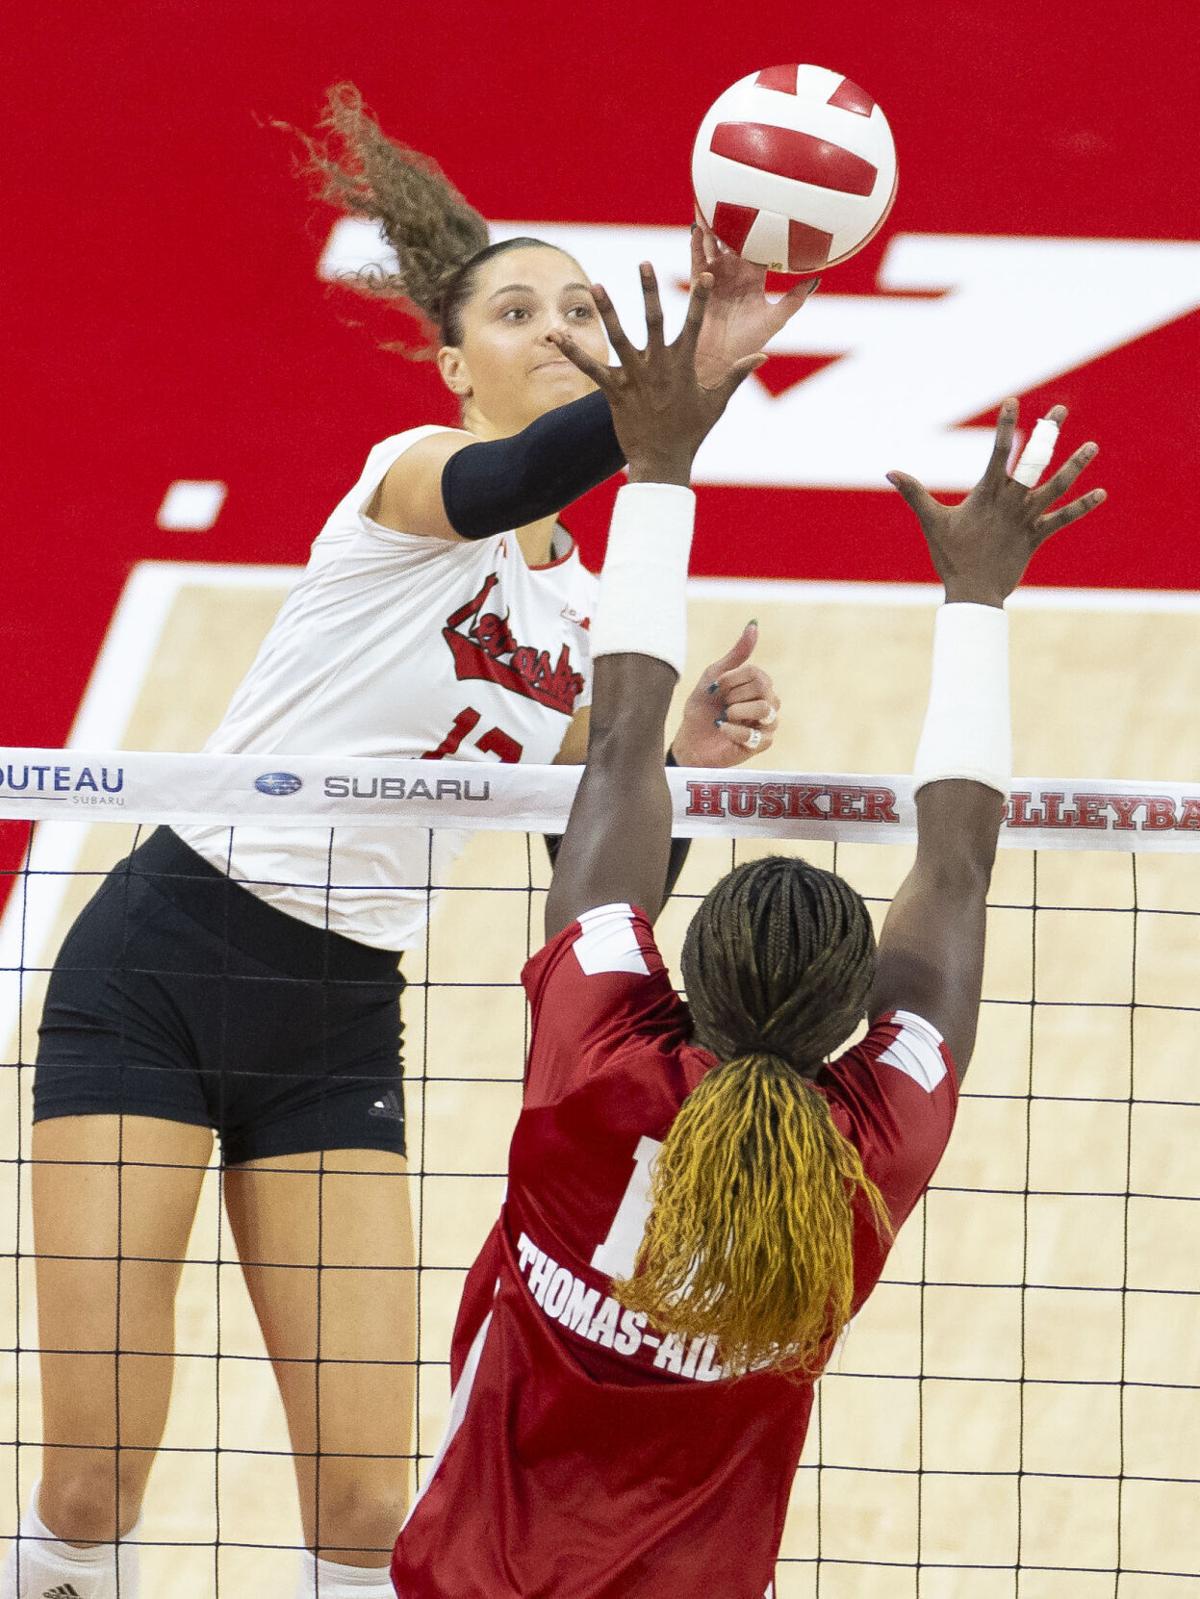 Top Devaney Center moments (and what's next)